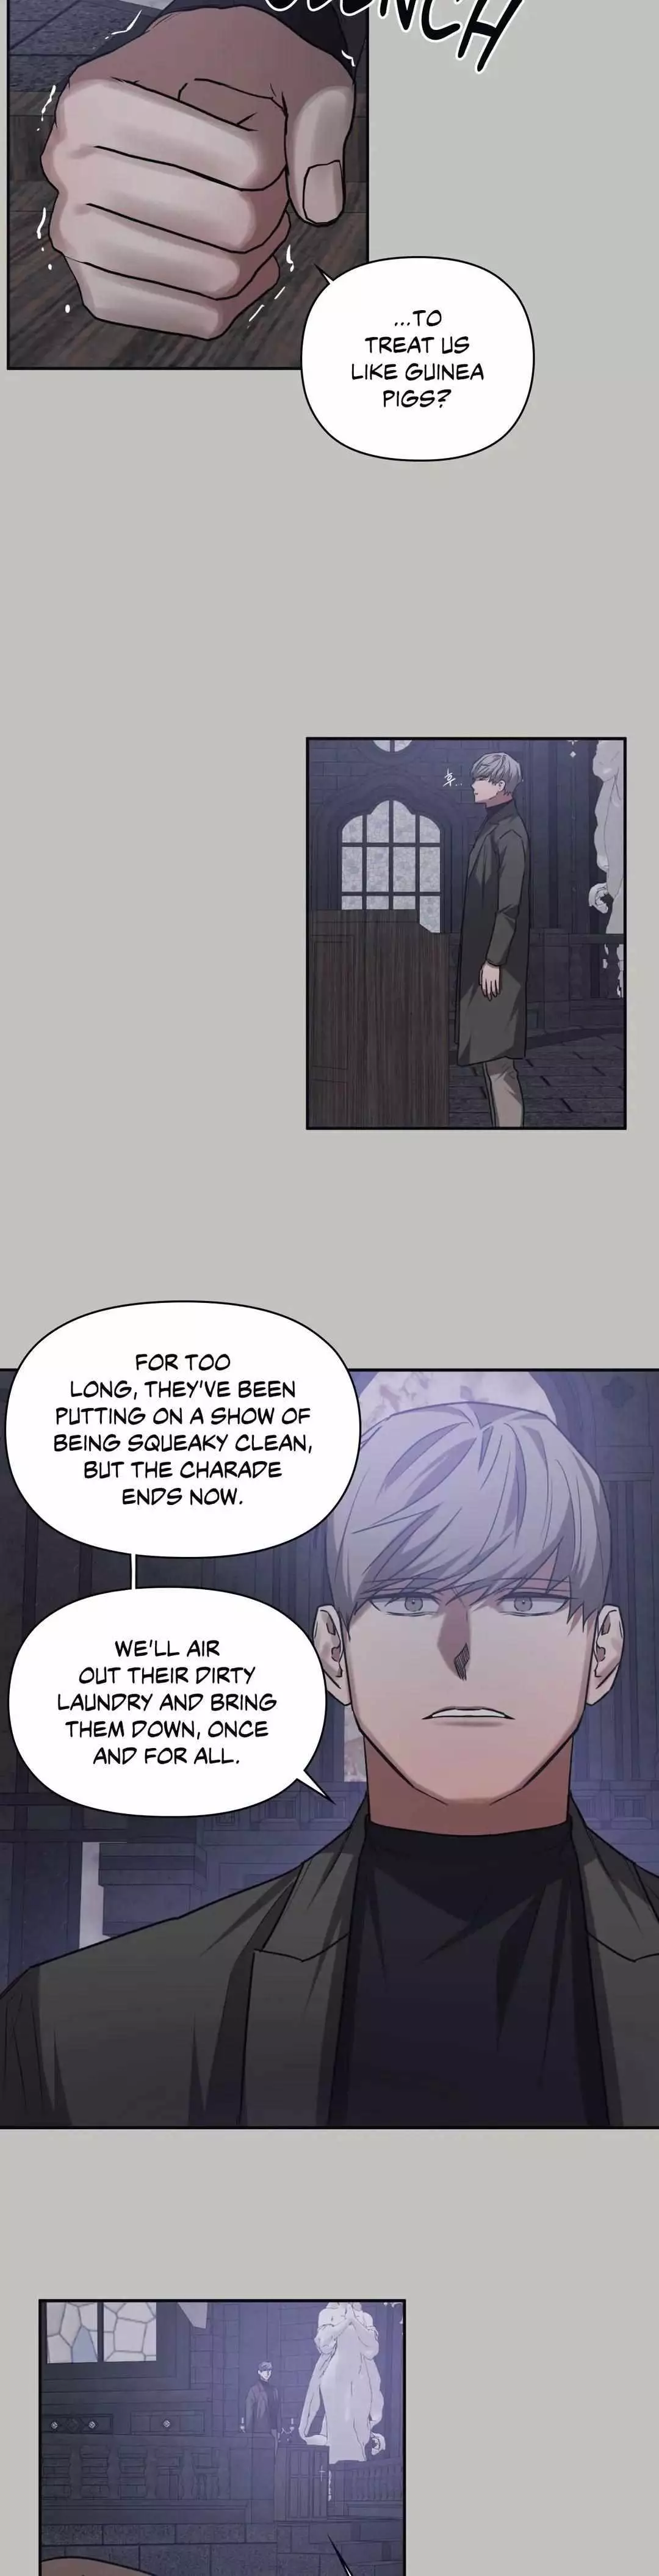 Guilty Affection - 74 page 12-8ab21f81